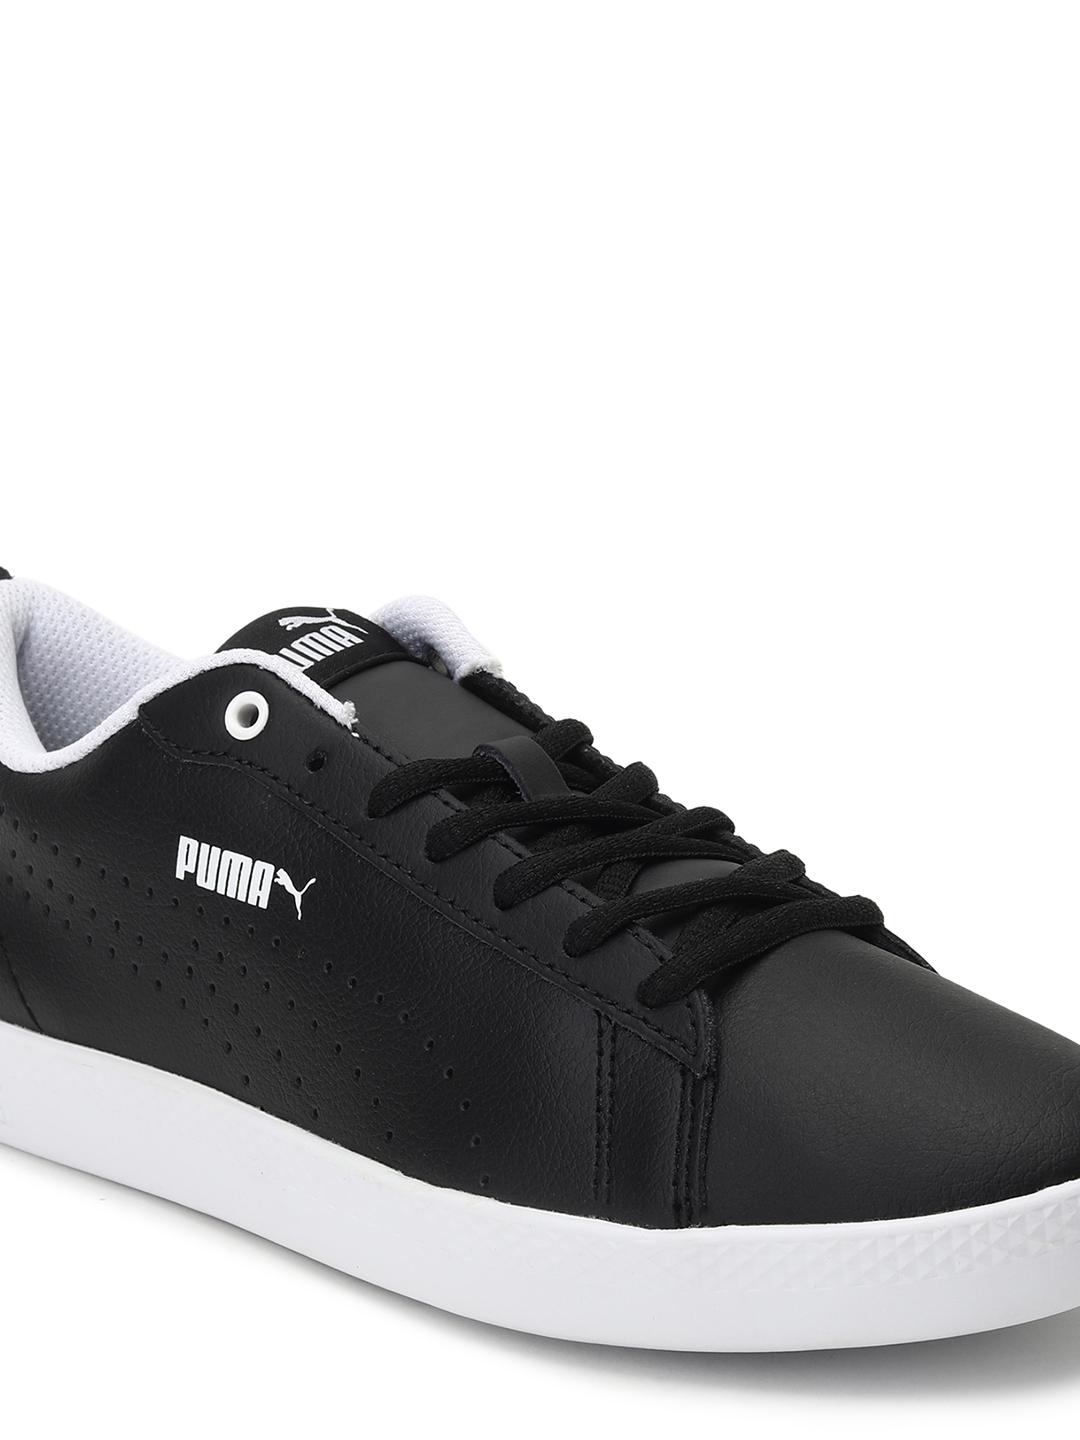 Puma | Smash Perf Leather Women's Sneakers 4